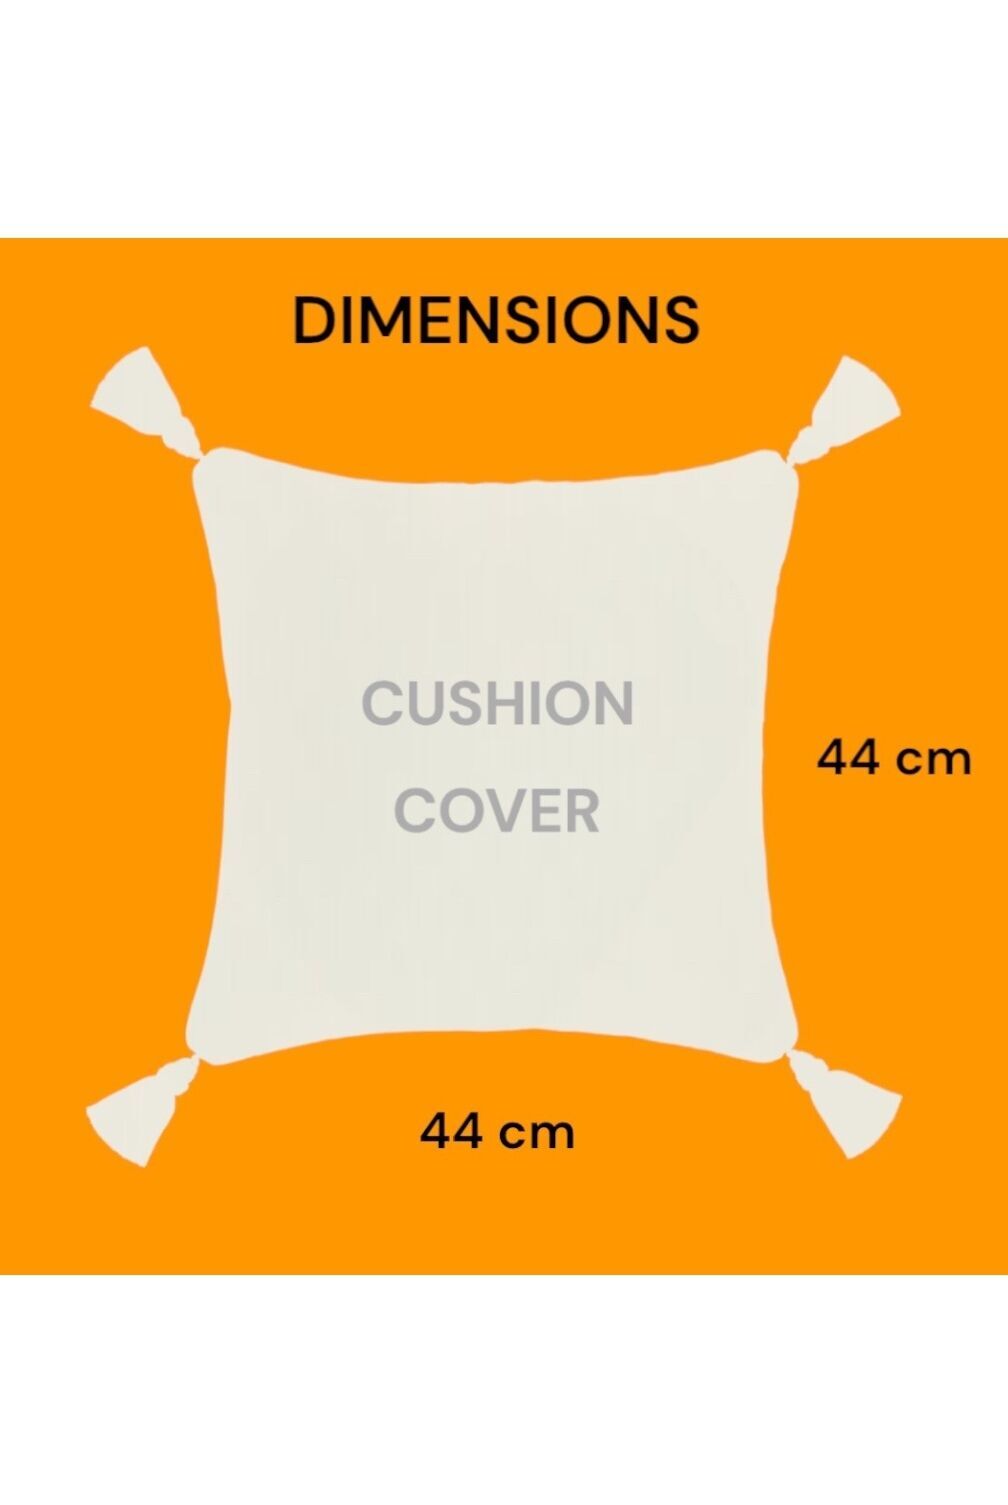 AFRICAN CUSHION COVER